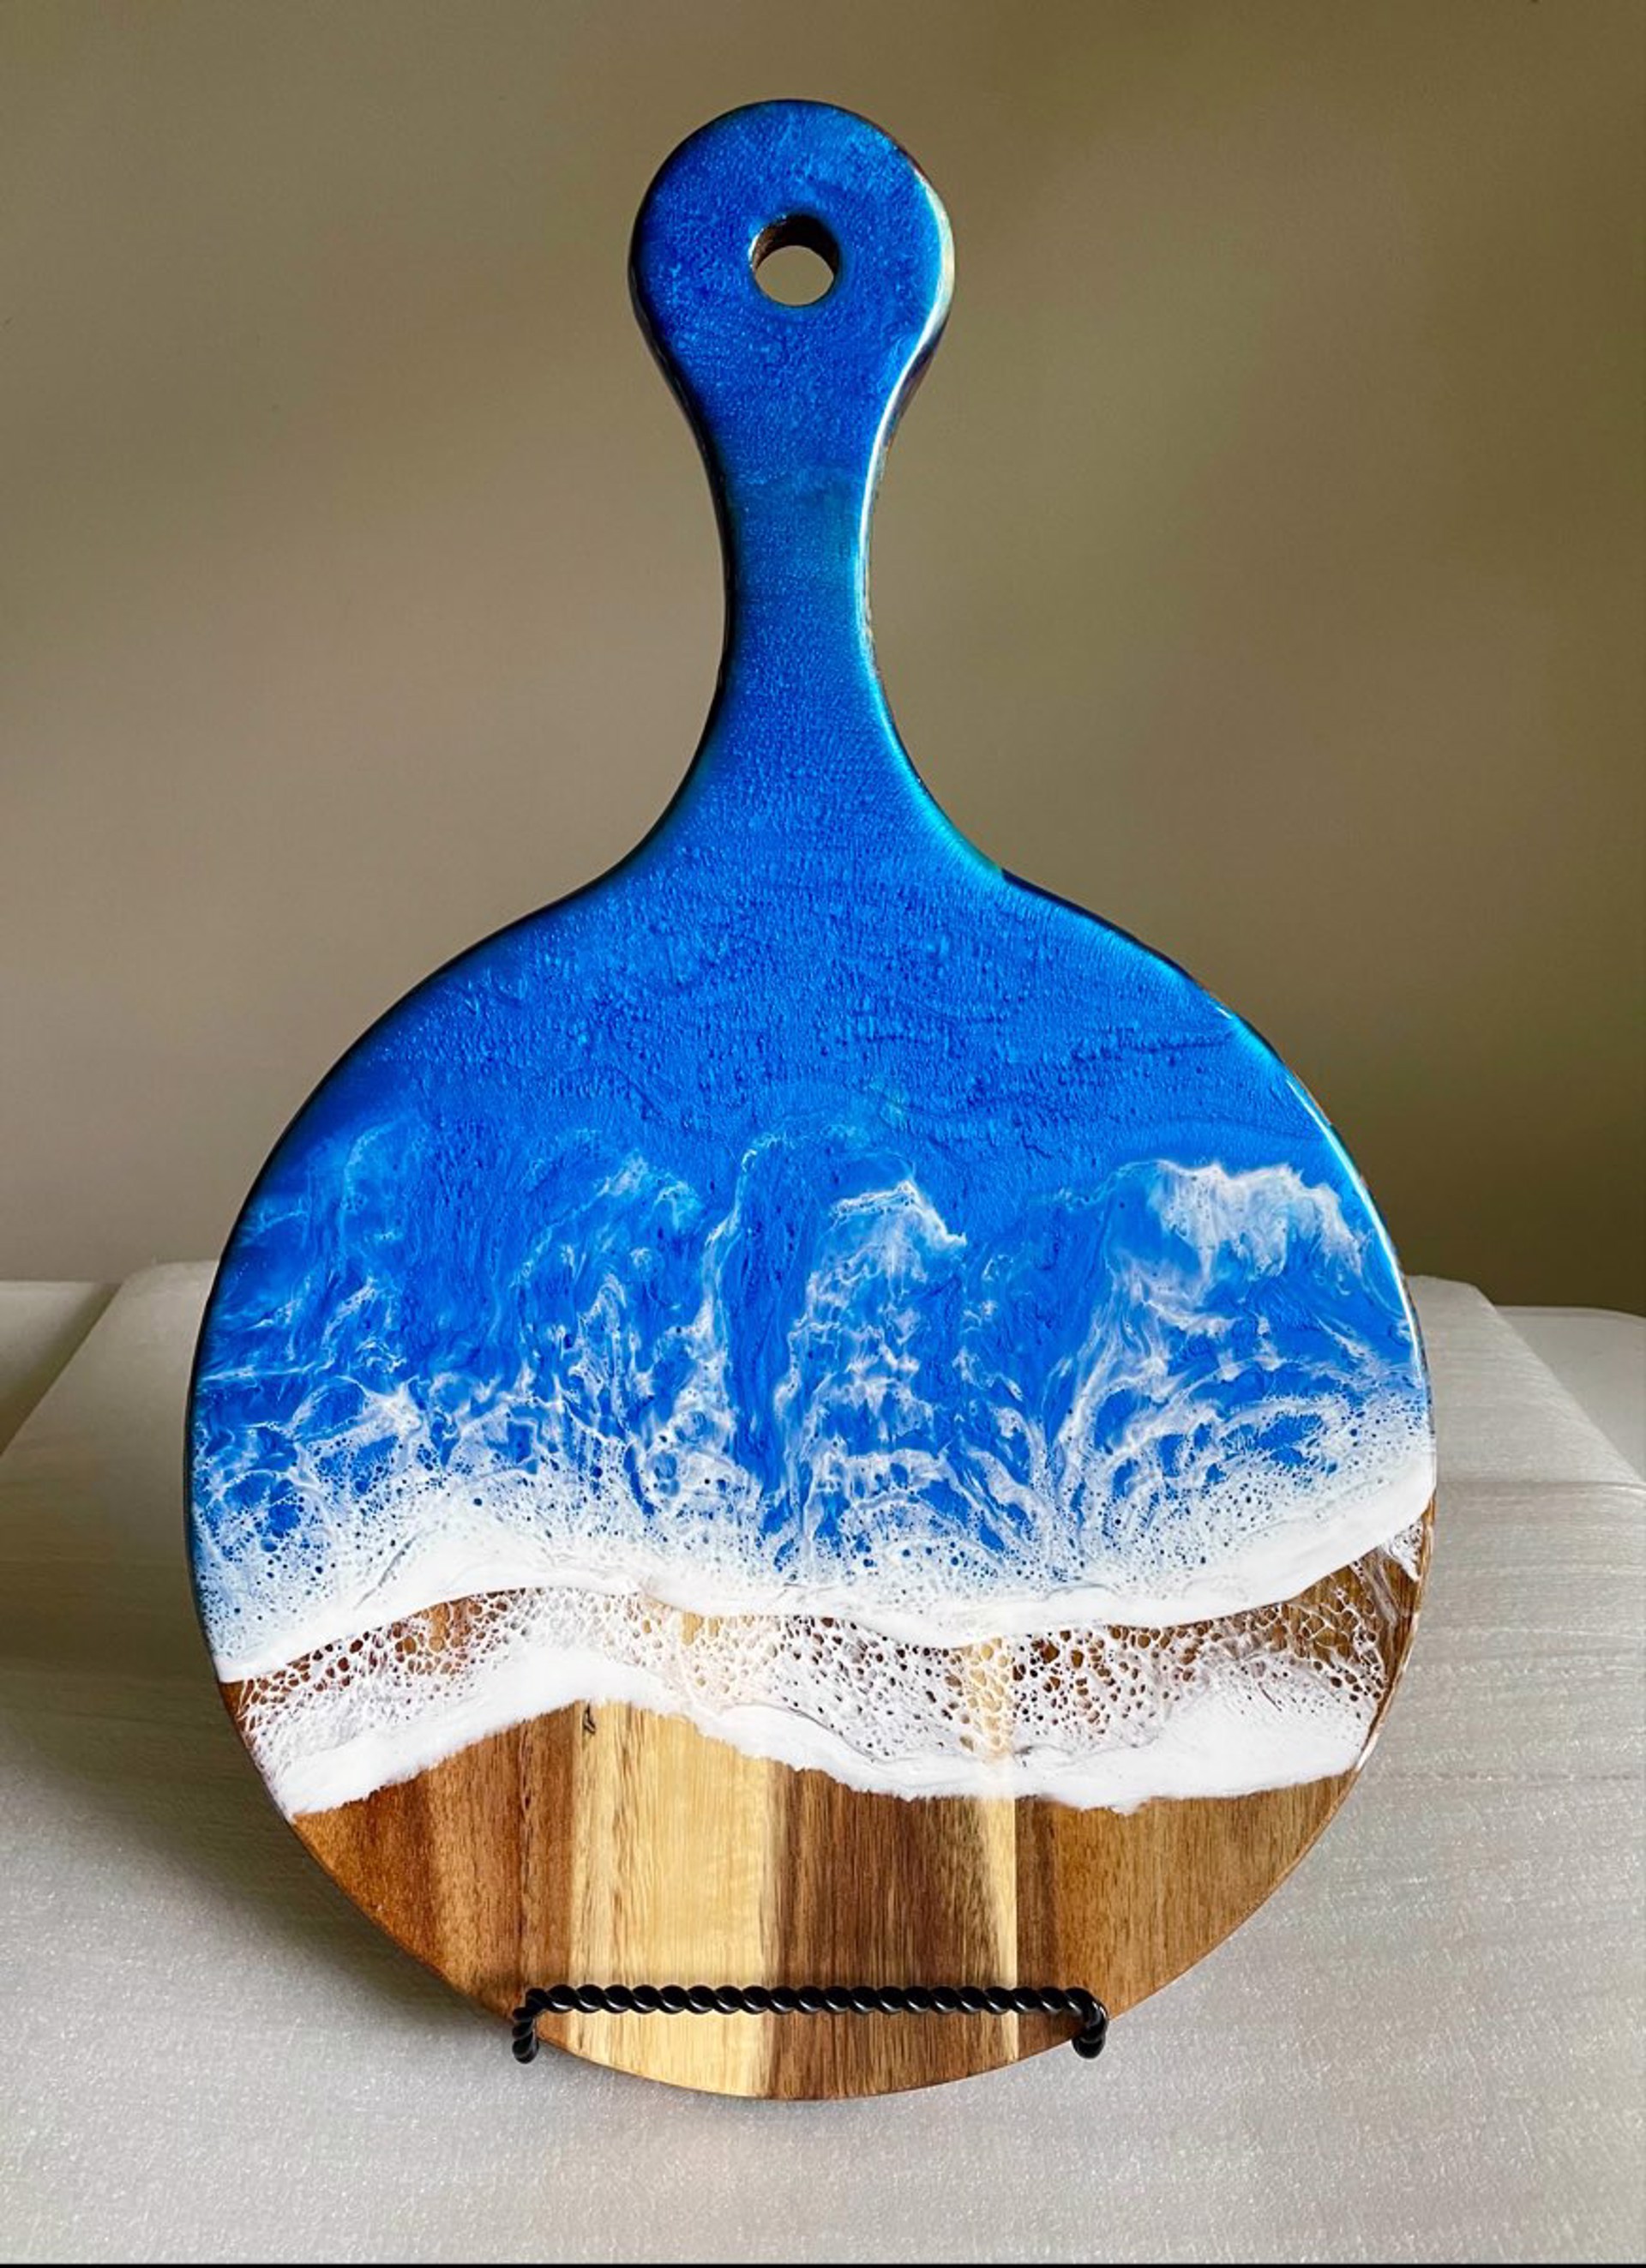 MDM22-15 Round Blue Resin and Wood Charcuterie Board by Mary Duke McCartt